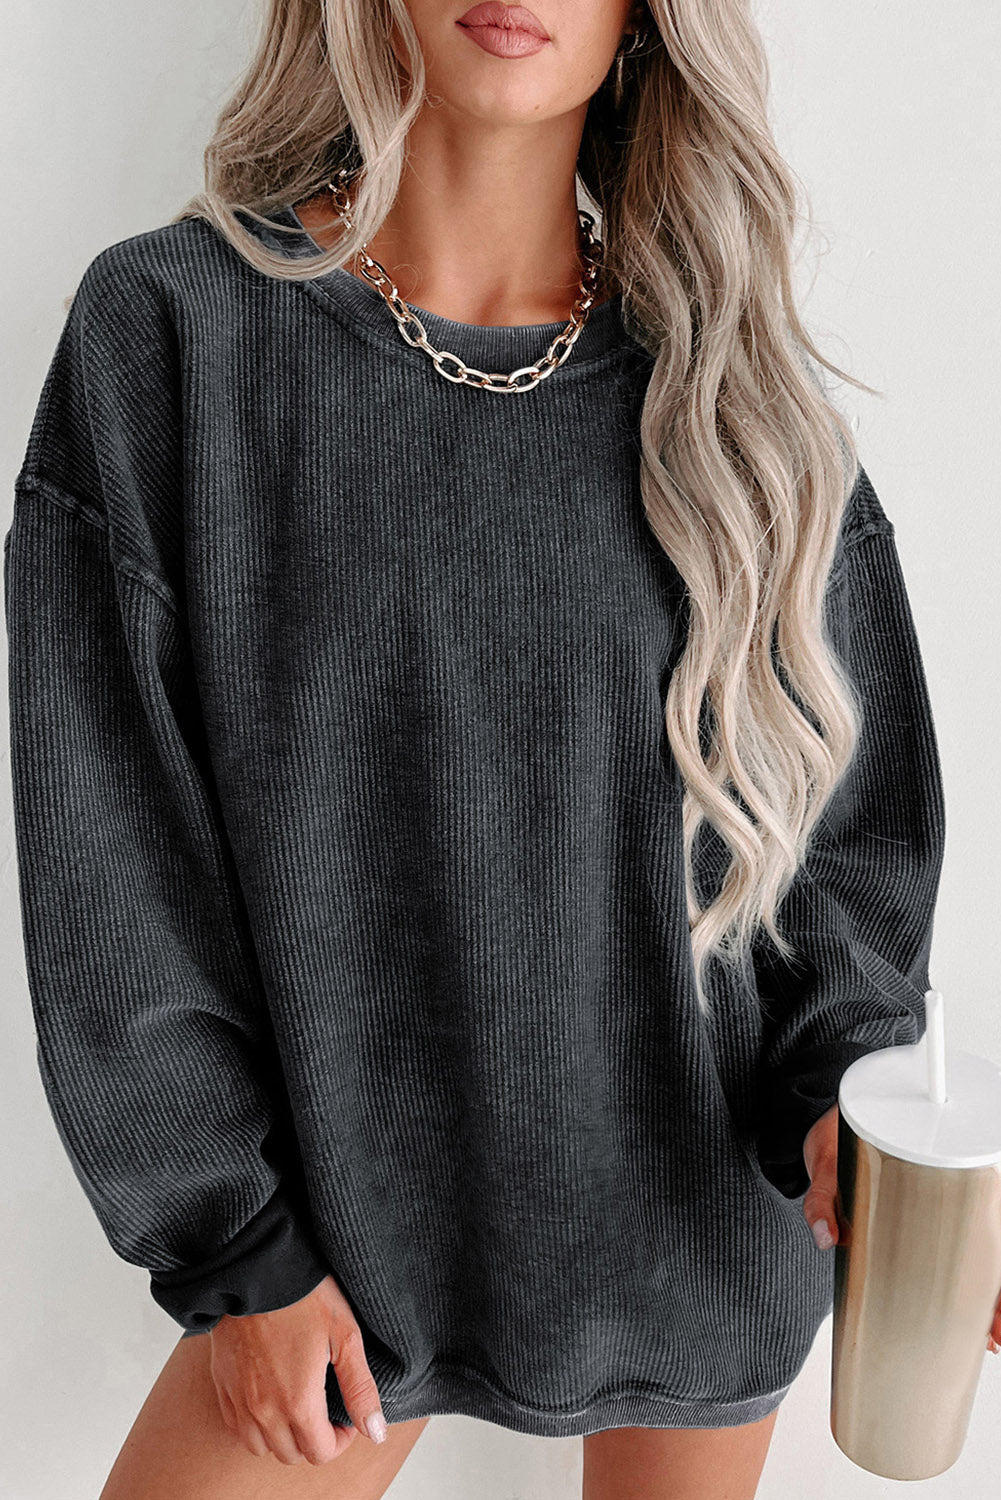 Black solid ribbed knit round neck pullover sweatshirt - s / 100% polyester - tops